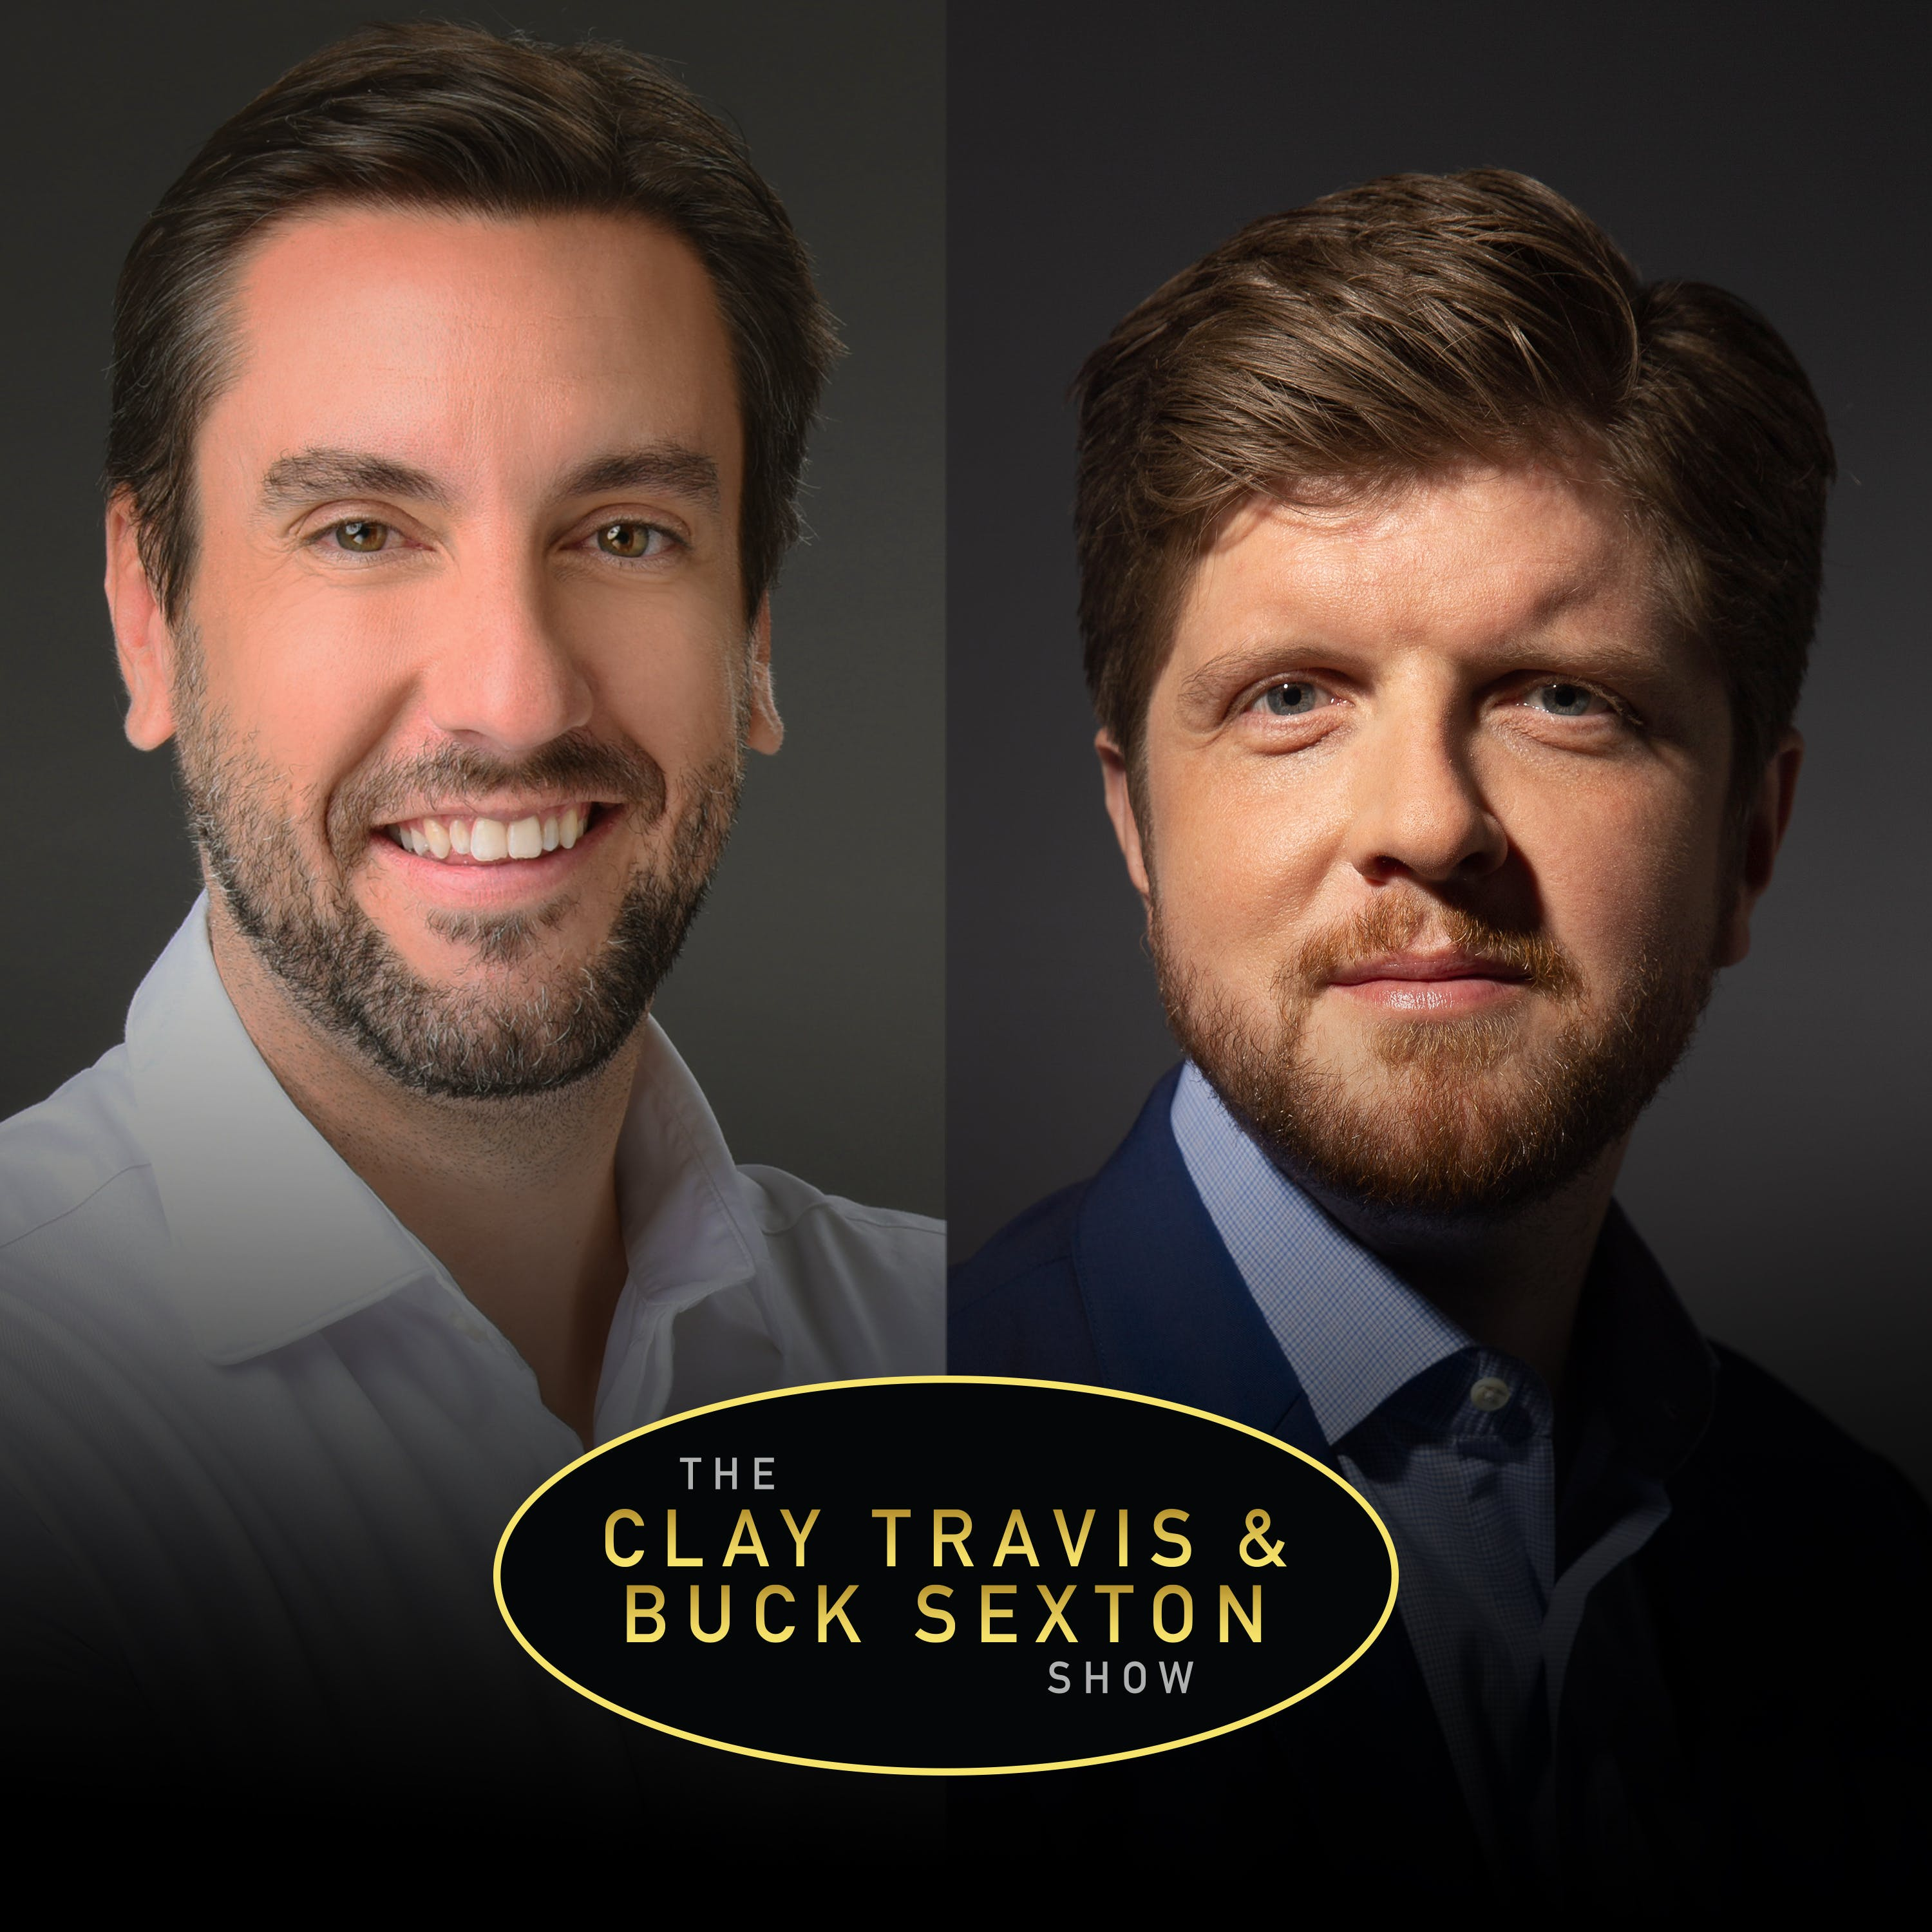 Clay Travis and Buck Sexton Show H1 – Jul 22 2021